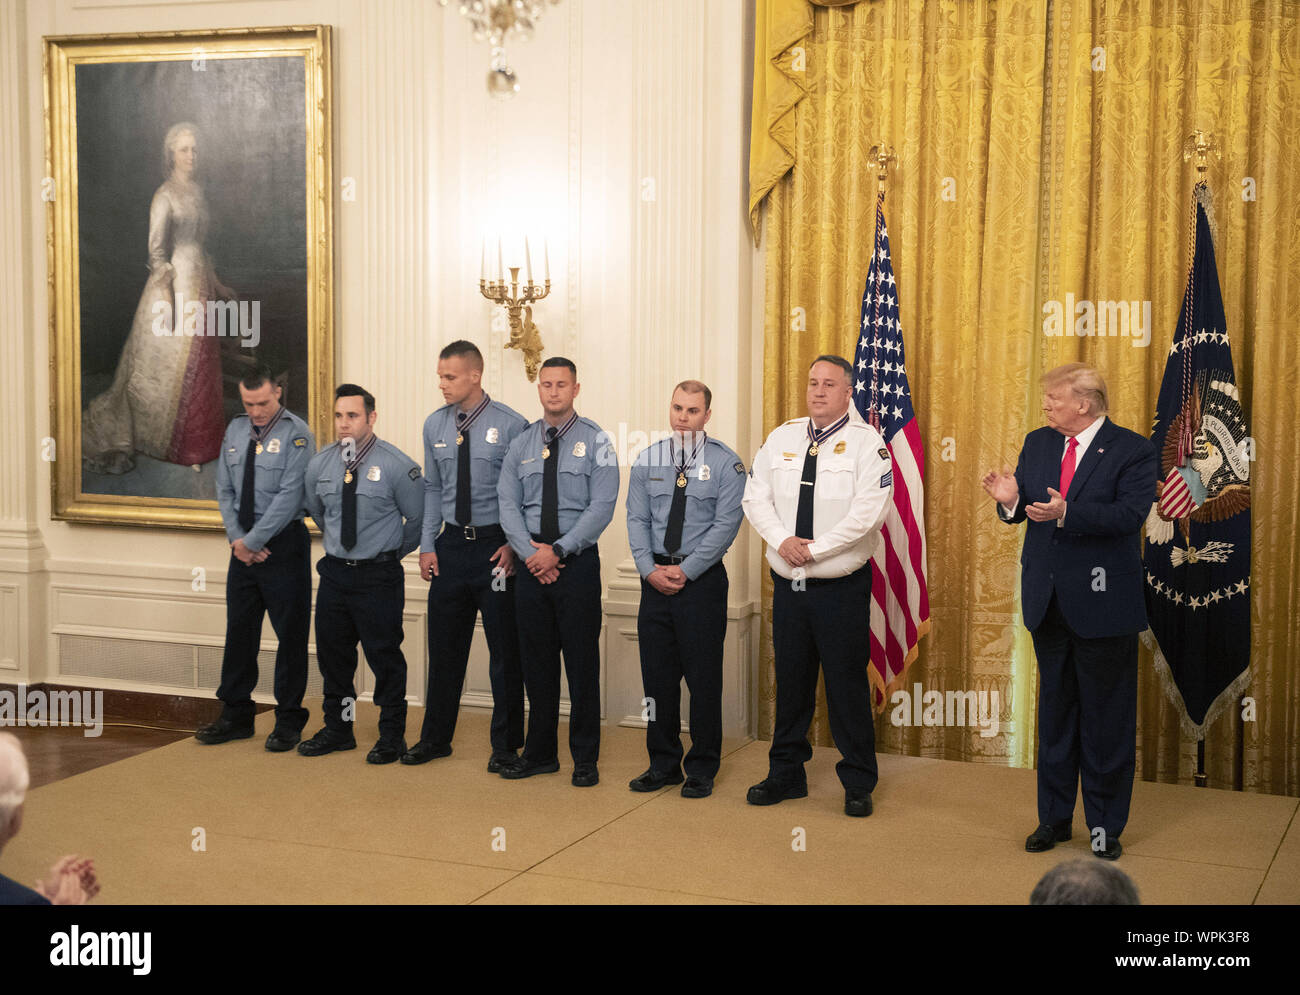 Washington, United States. 09th Sep, 2019. President Donald Trump applauds after awarding the Public Safety Officer Medal of Valor to Dayton Police Officers Sgt. William C. Knight, Officer Brian Rolfes, Officer Jeremy Campbell, Officer Vincent Carter, Officer Ryan Nabel, and Officer David Denlinger during a ceremony in the East Room at the White House in Washington, DC on Monday, September 9, 2019. Trump recognized the six Dayton officers who stoped a mass shooting on August 4th where nine people were killed and 27 more were injured. Credit: UPI/Alamy Live News Stock Photo